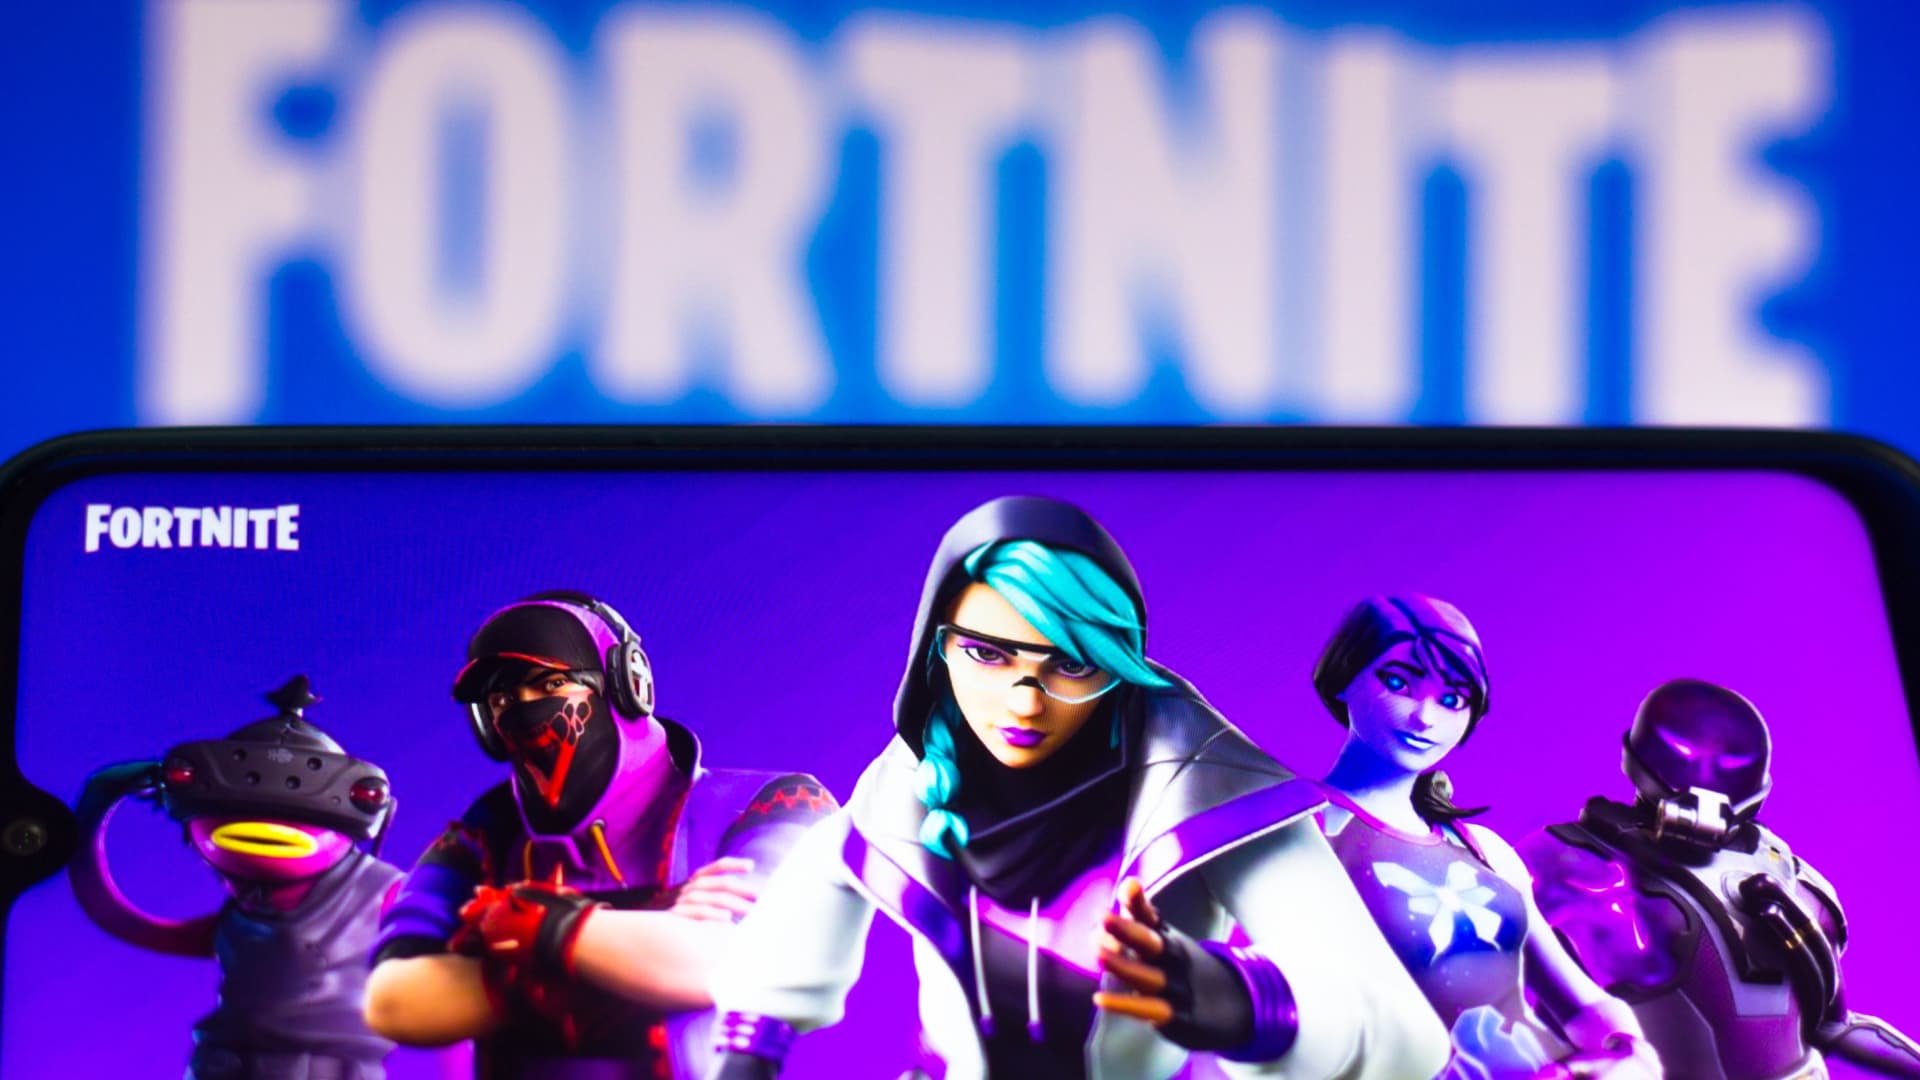 Fortnite players are getting $245 million in refunds — here’s who qualifies